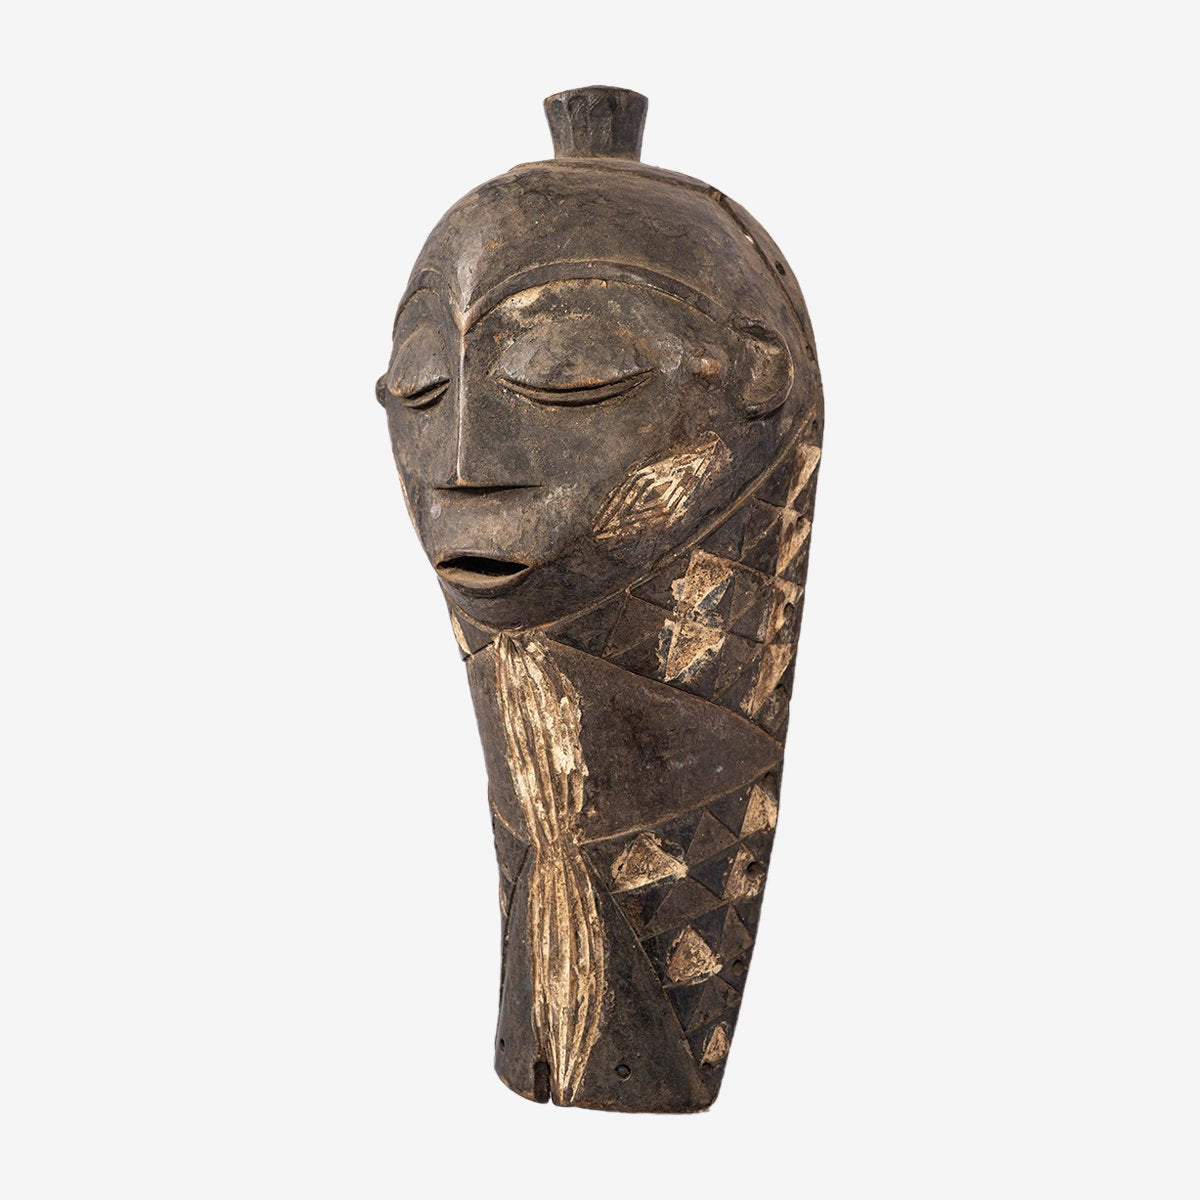 Pende Mask - Authentic African handicrafts | Clothing, bags, painting, toys & more - CULTURE HUB by Muthoni Unchained